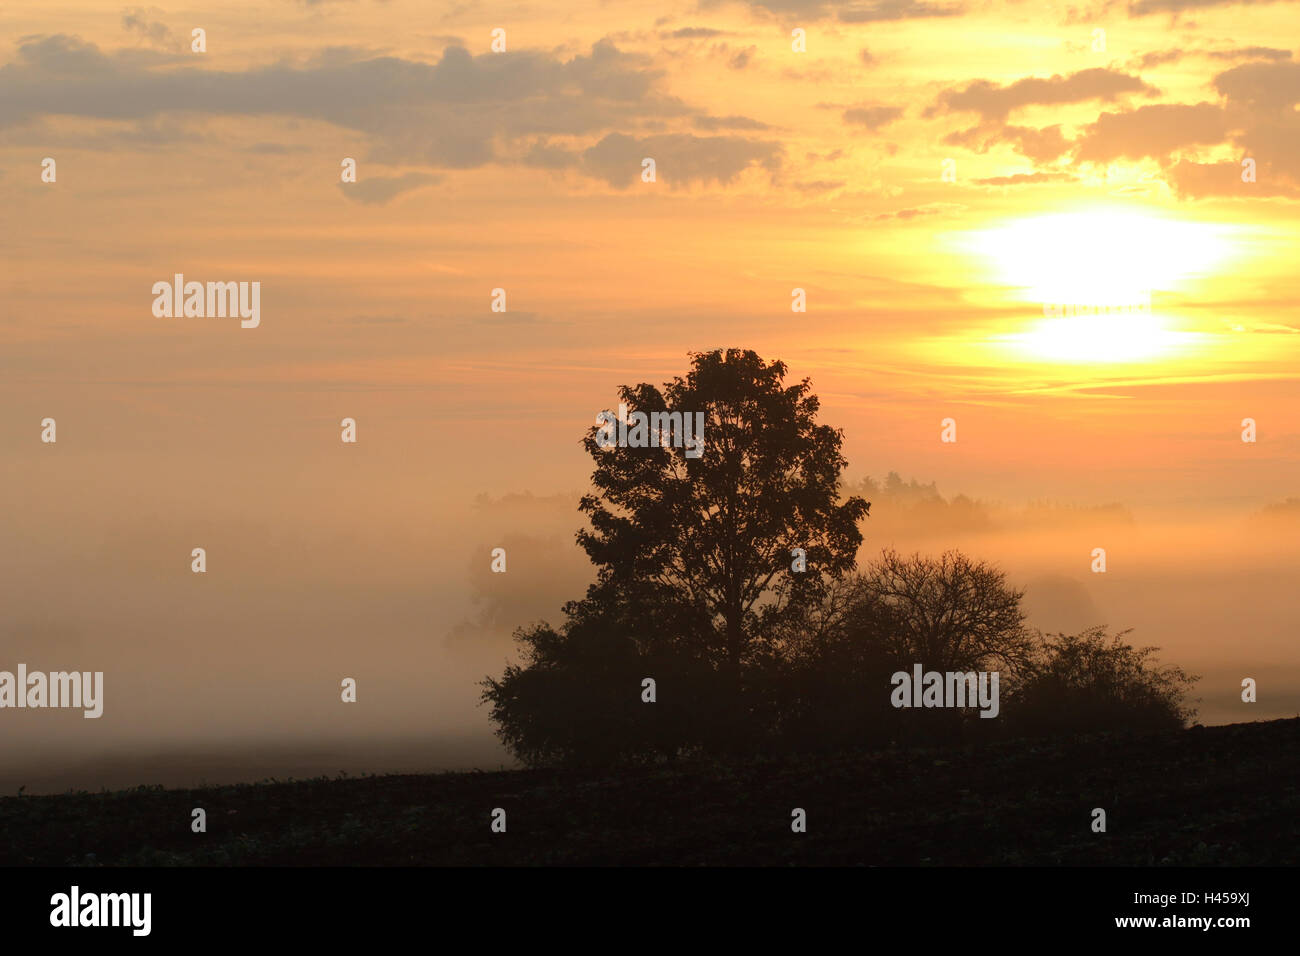 Early morning sun over the rural countryside Stock Photo